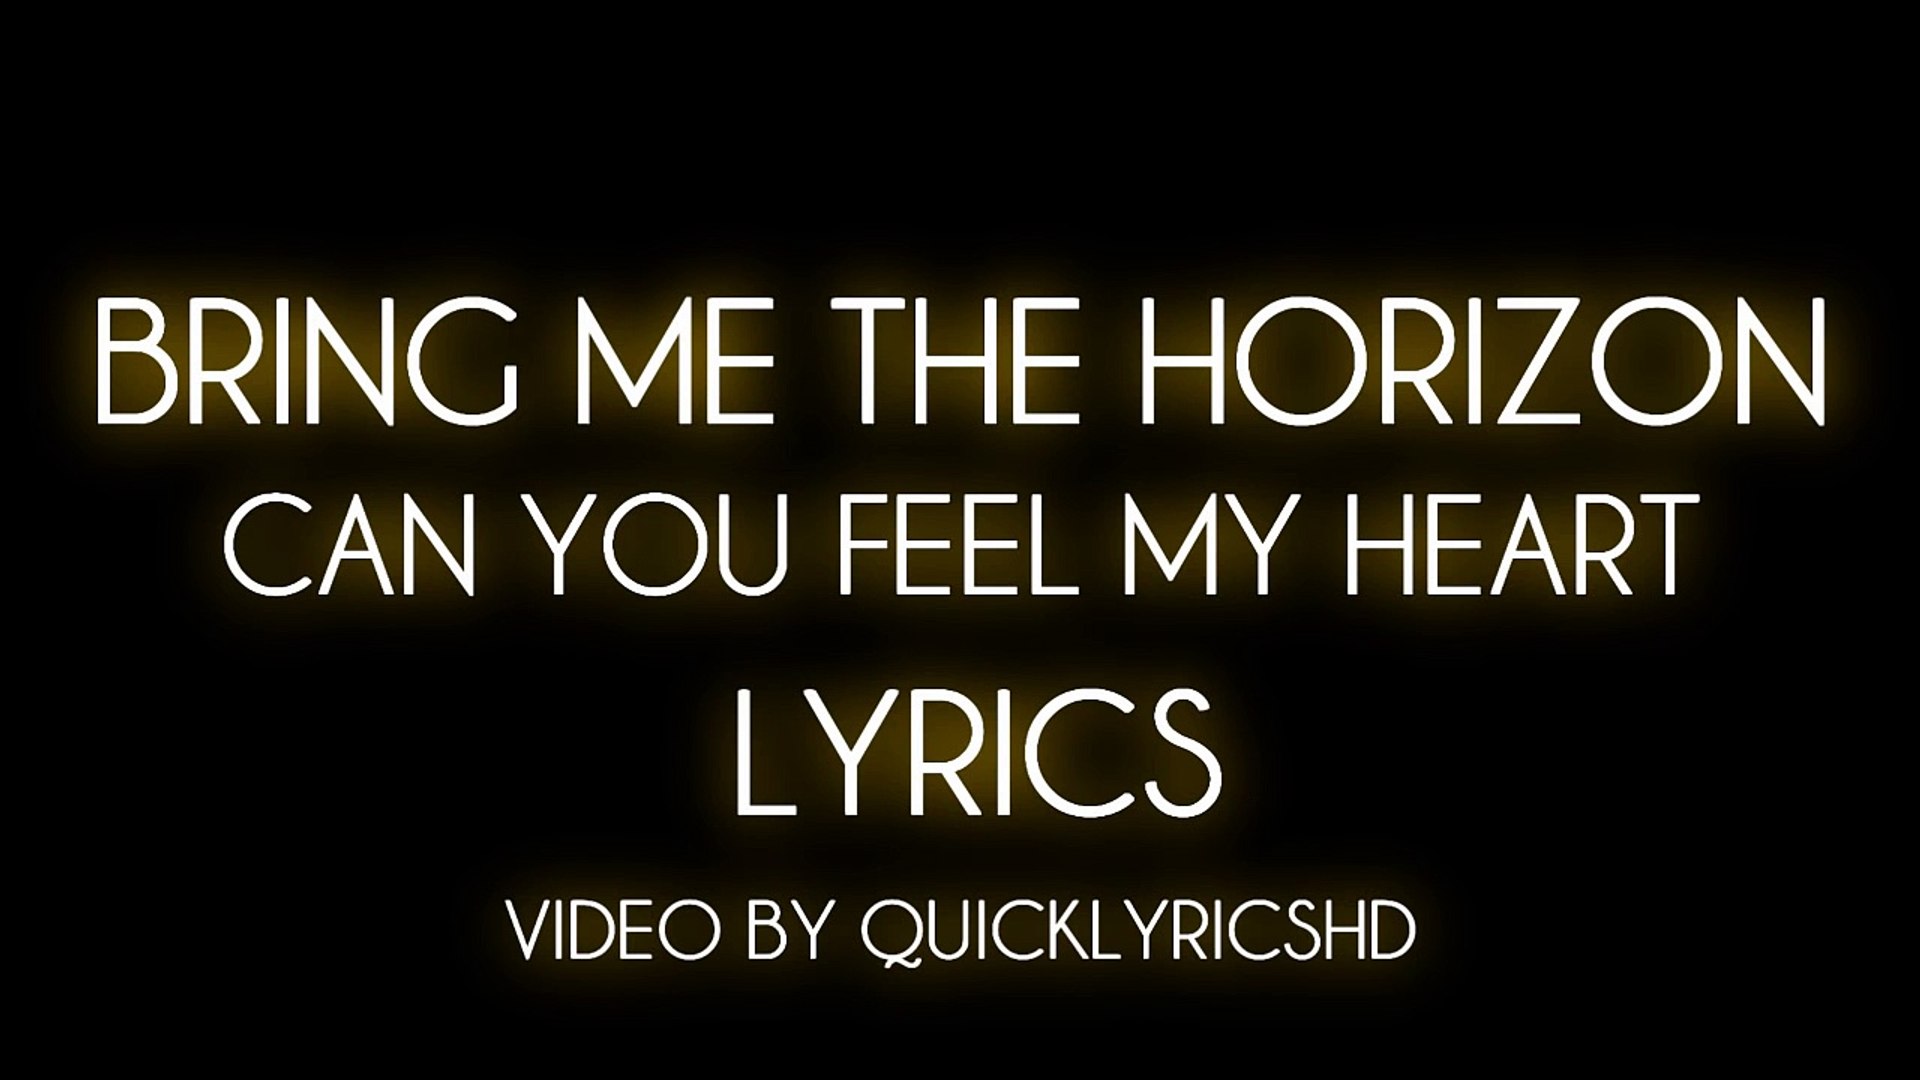 Break my heart if you can фф. Bring me the Horizon can you feel my Heart. Bring the Horizon can you feel my Heart текст. Bring me the Horizon текст. Bring me the Horizon can you feel my.